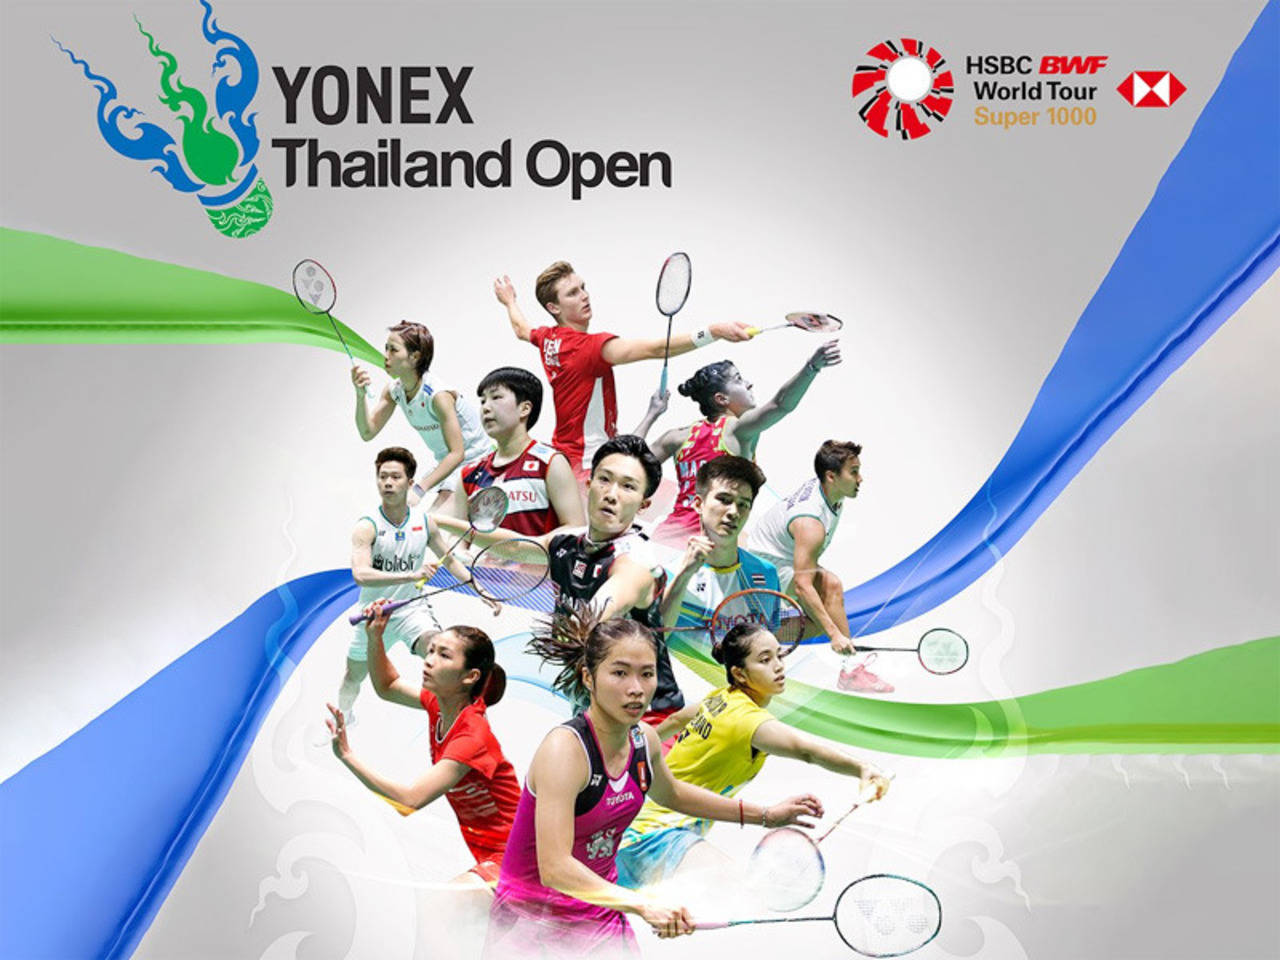 Top-seeded Minions out of Thailand badminton after positive test Badminton News